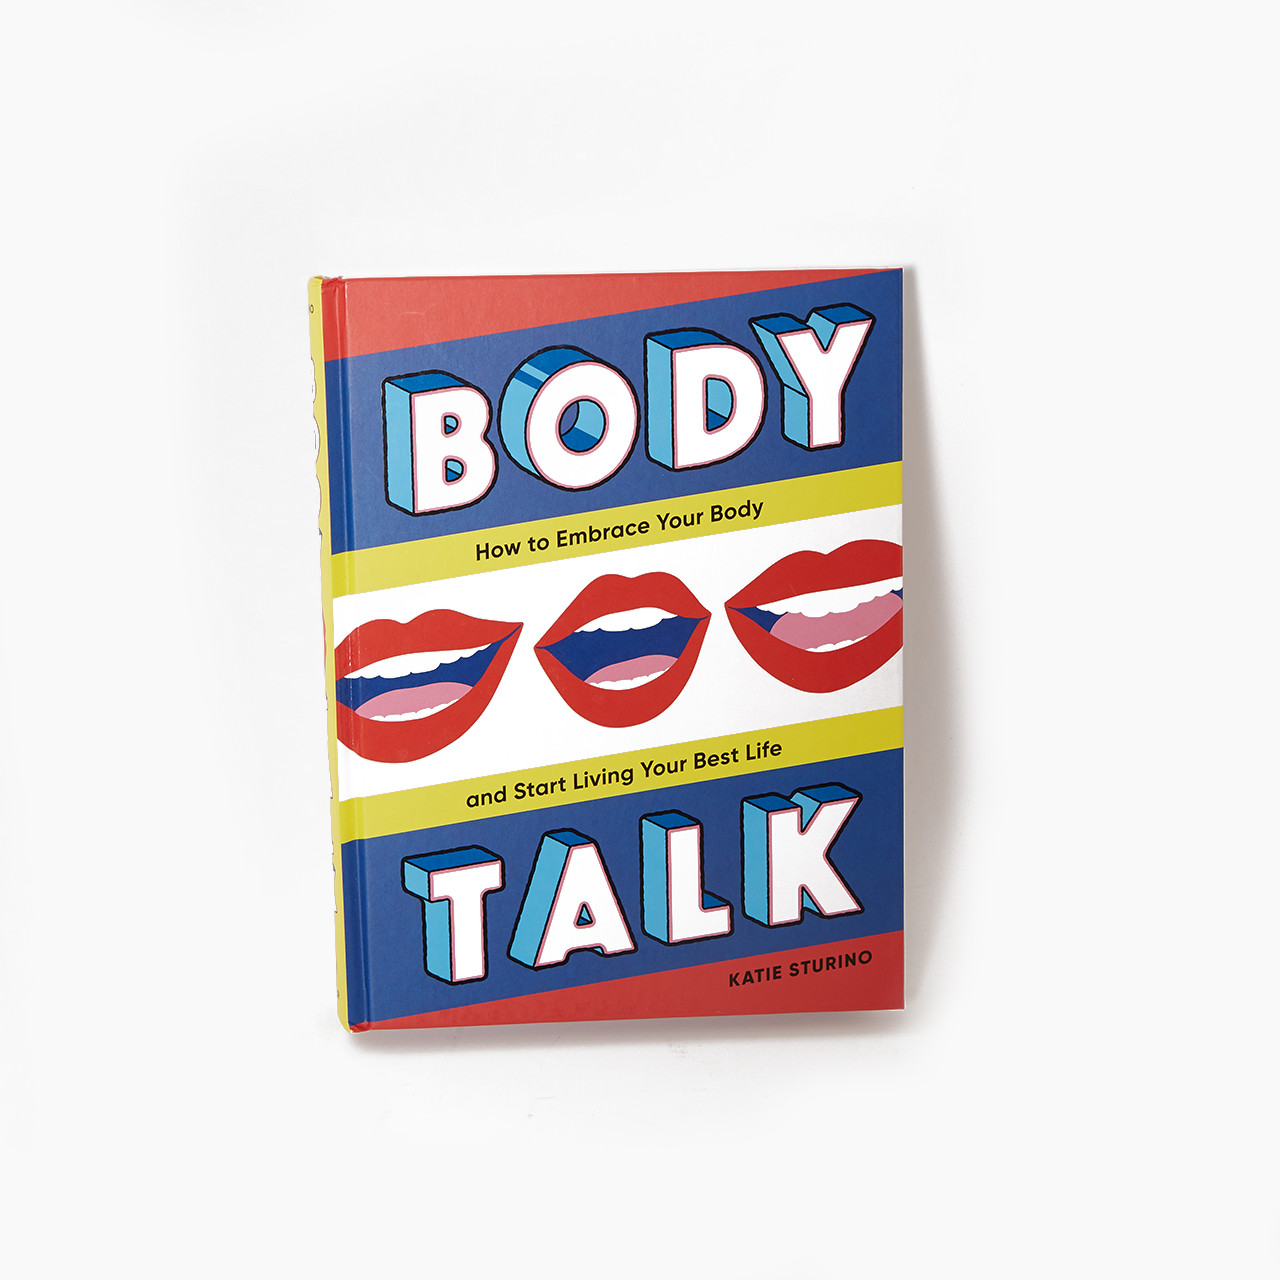 Body Talk: How to Embrace Your Body and Start Living Your Best Life by Katie Sturino